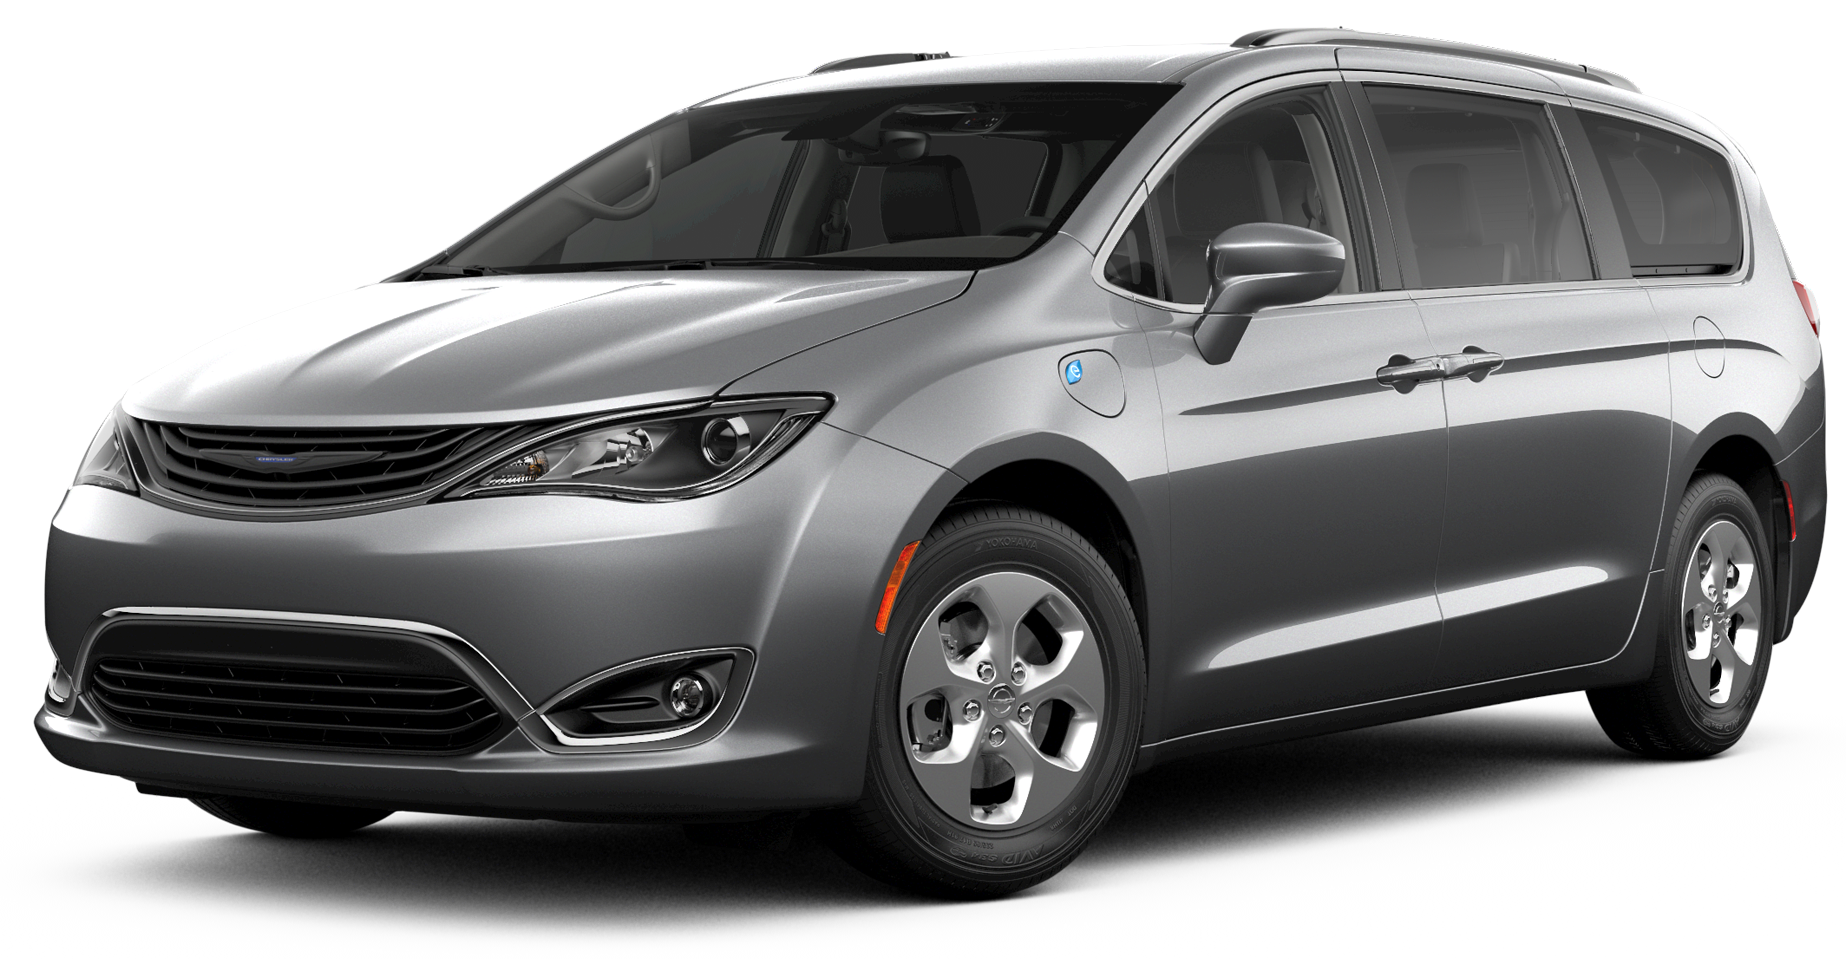 2019 Pacifica Hybrid Incentives, Specials & Offers Putnam CT